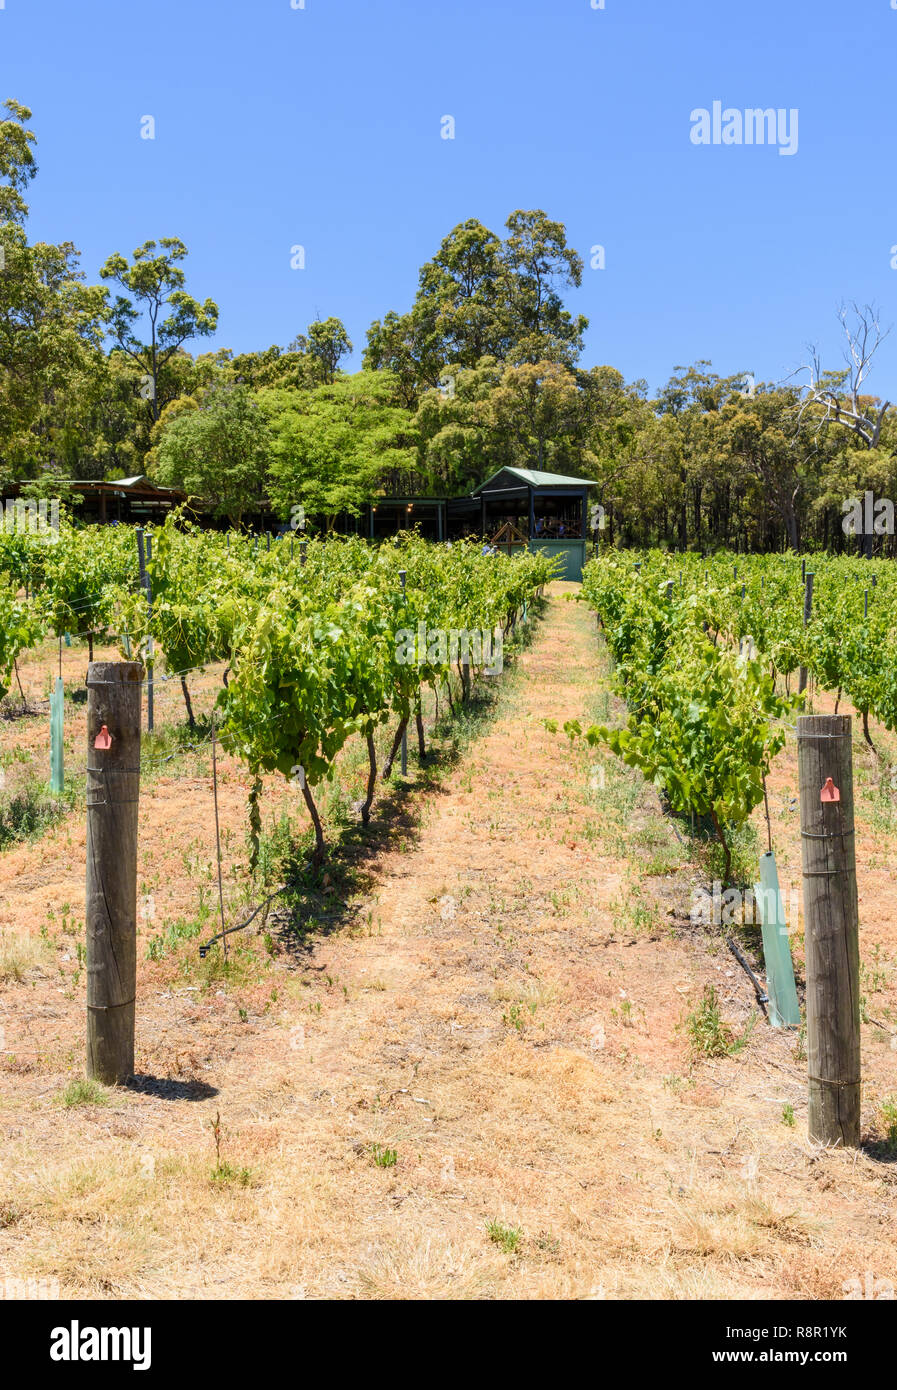 Grapevines at Fairbrossen Winery and Cafe in the Bickley Valley, Carmel, Western Australia Stock Photo